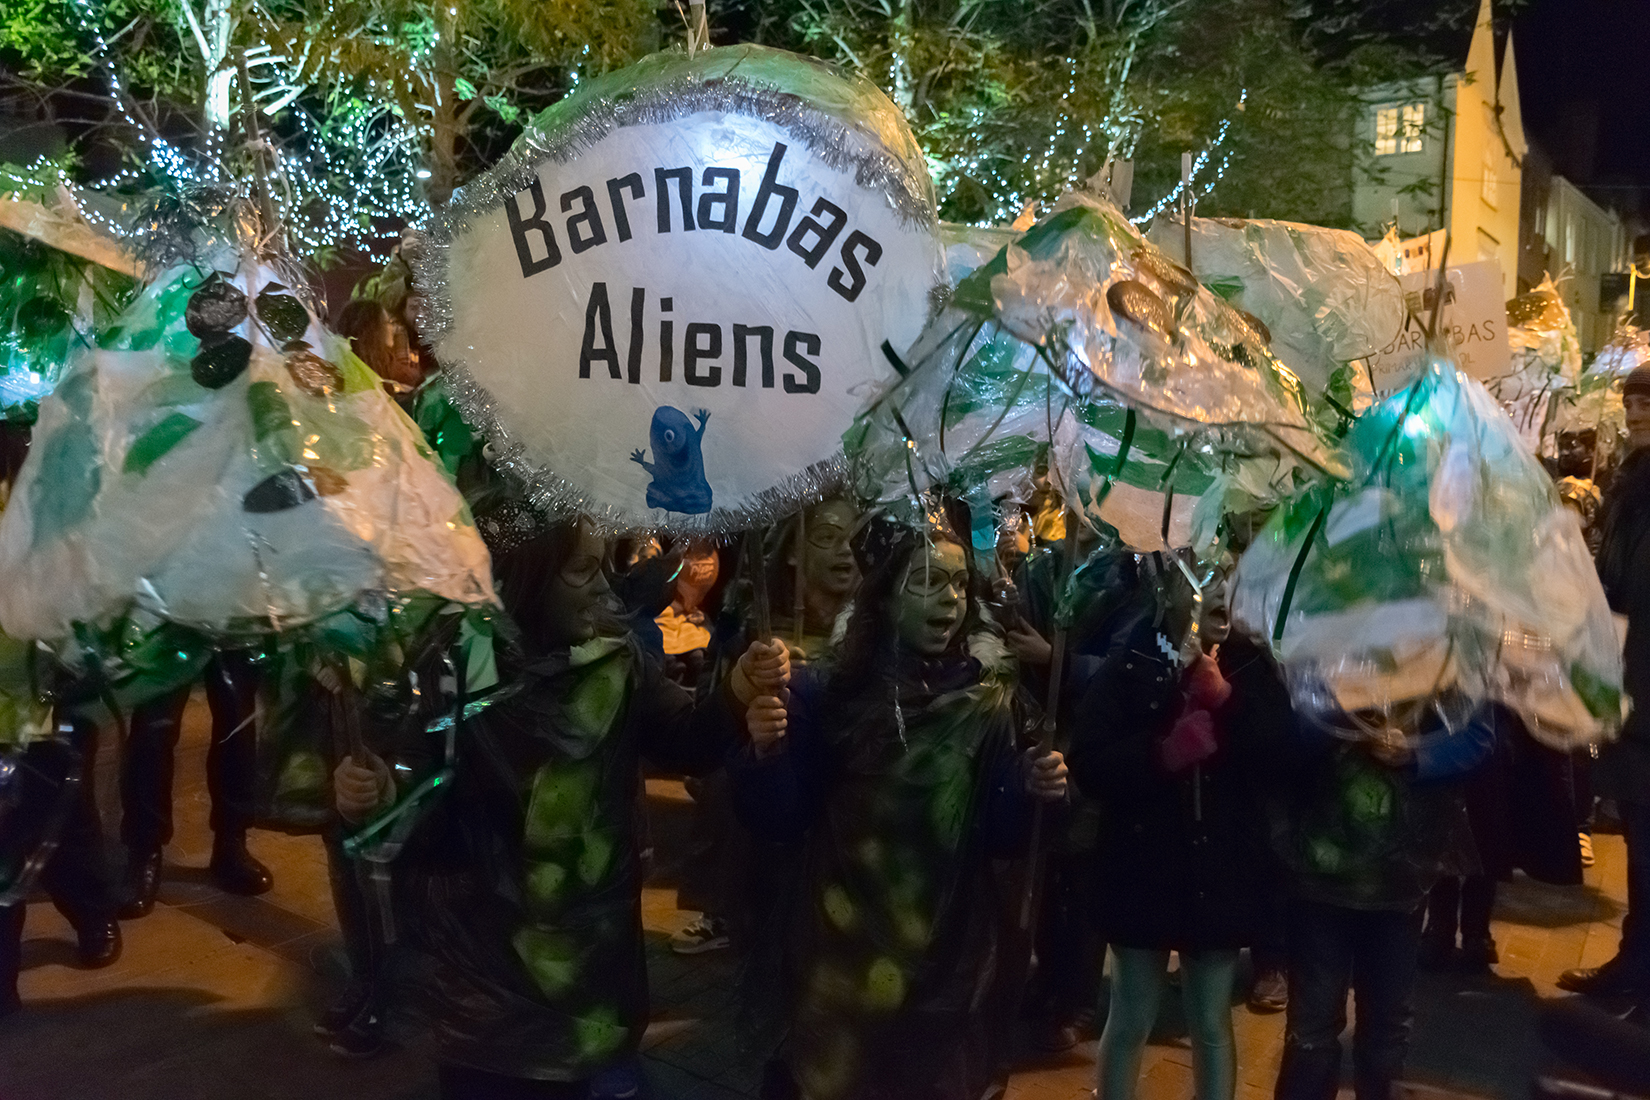 St Barnabas Primary School children line up as the Barnabas Aliens